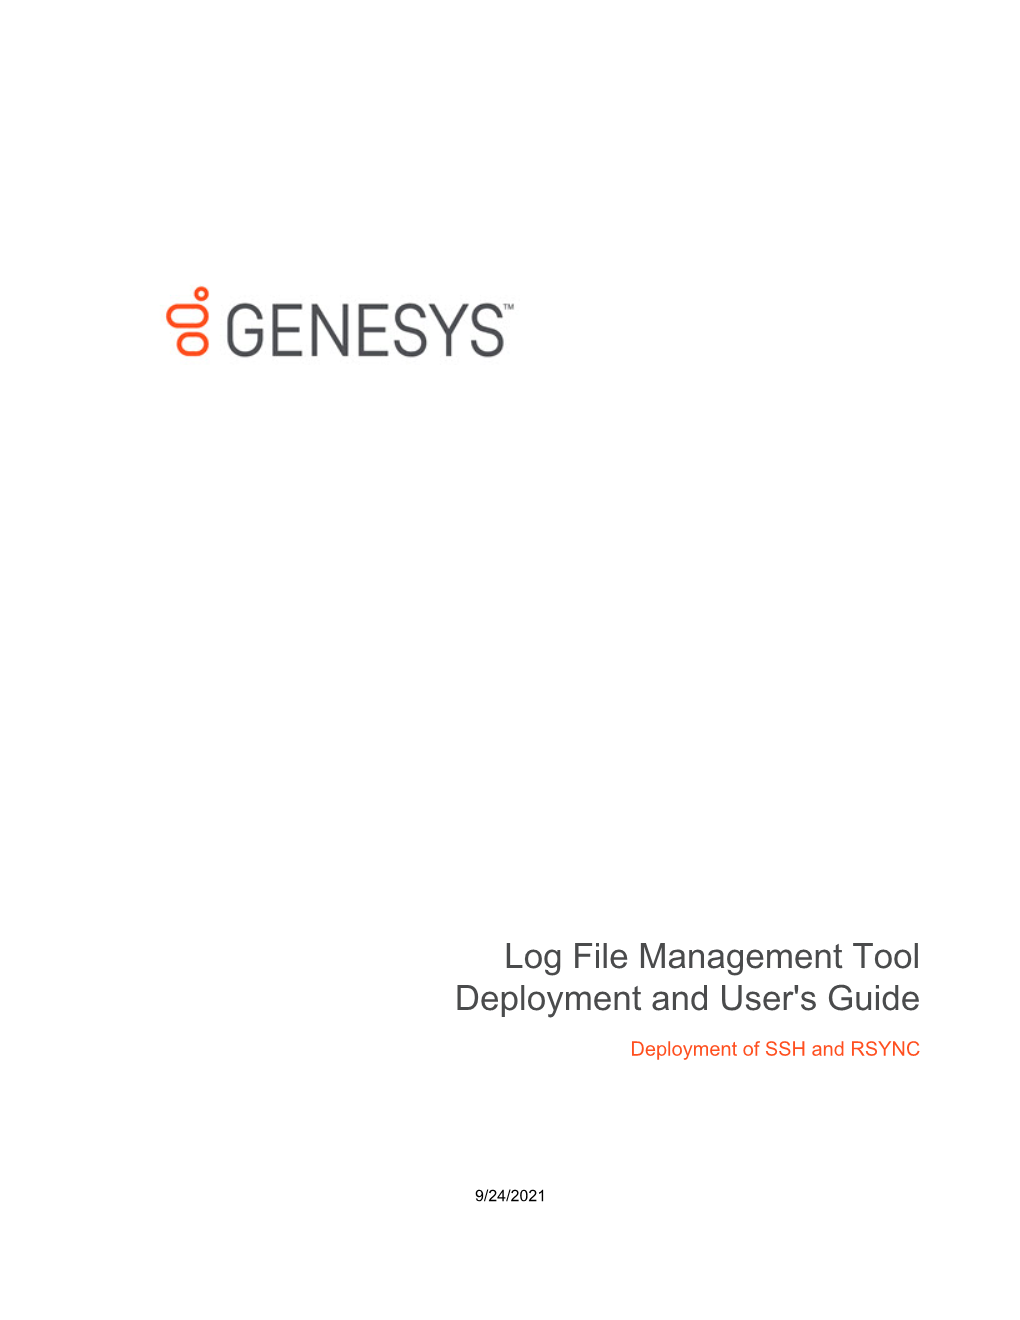 Log File Management Tool Deployment and User's Guide